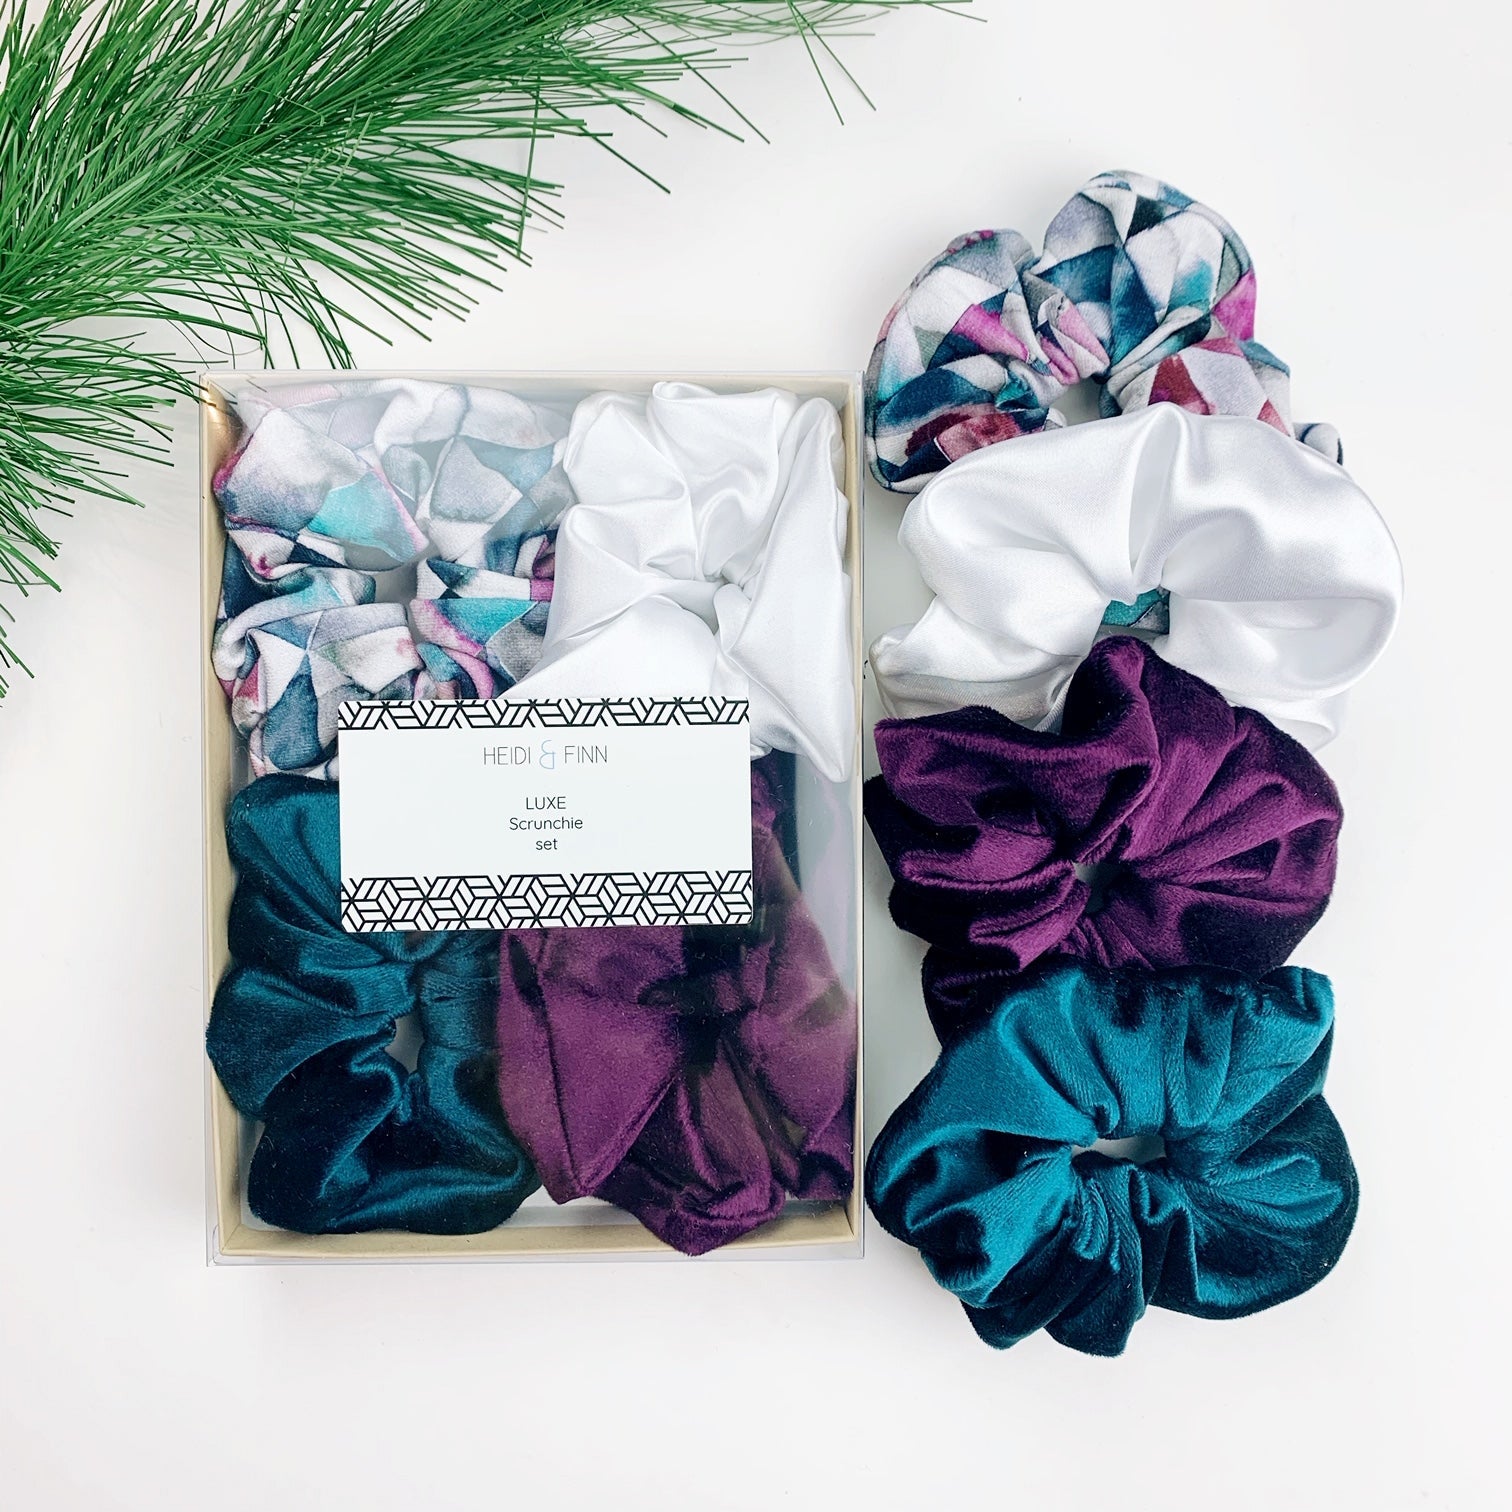 Luxe Scrunchie gift box set - Jewels